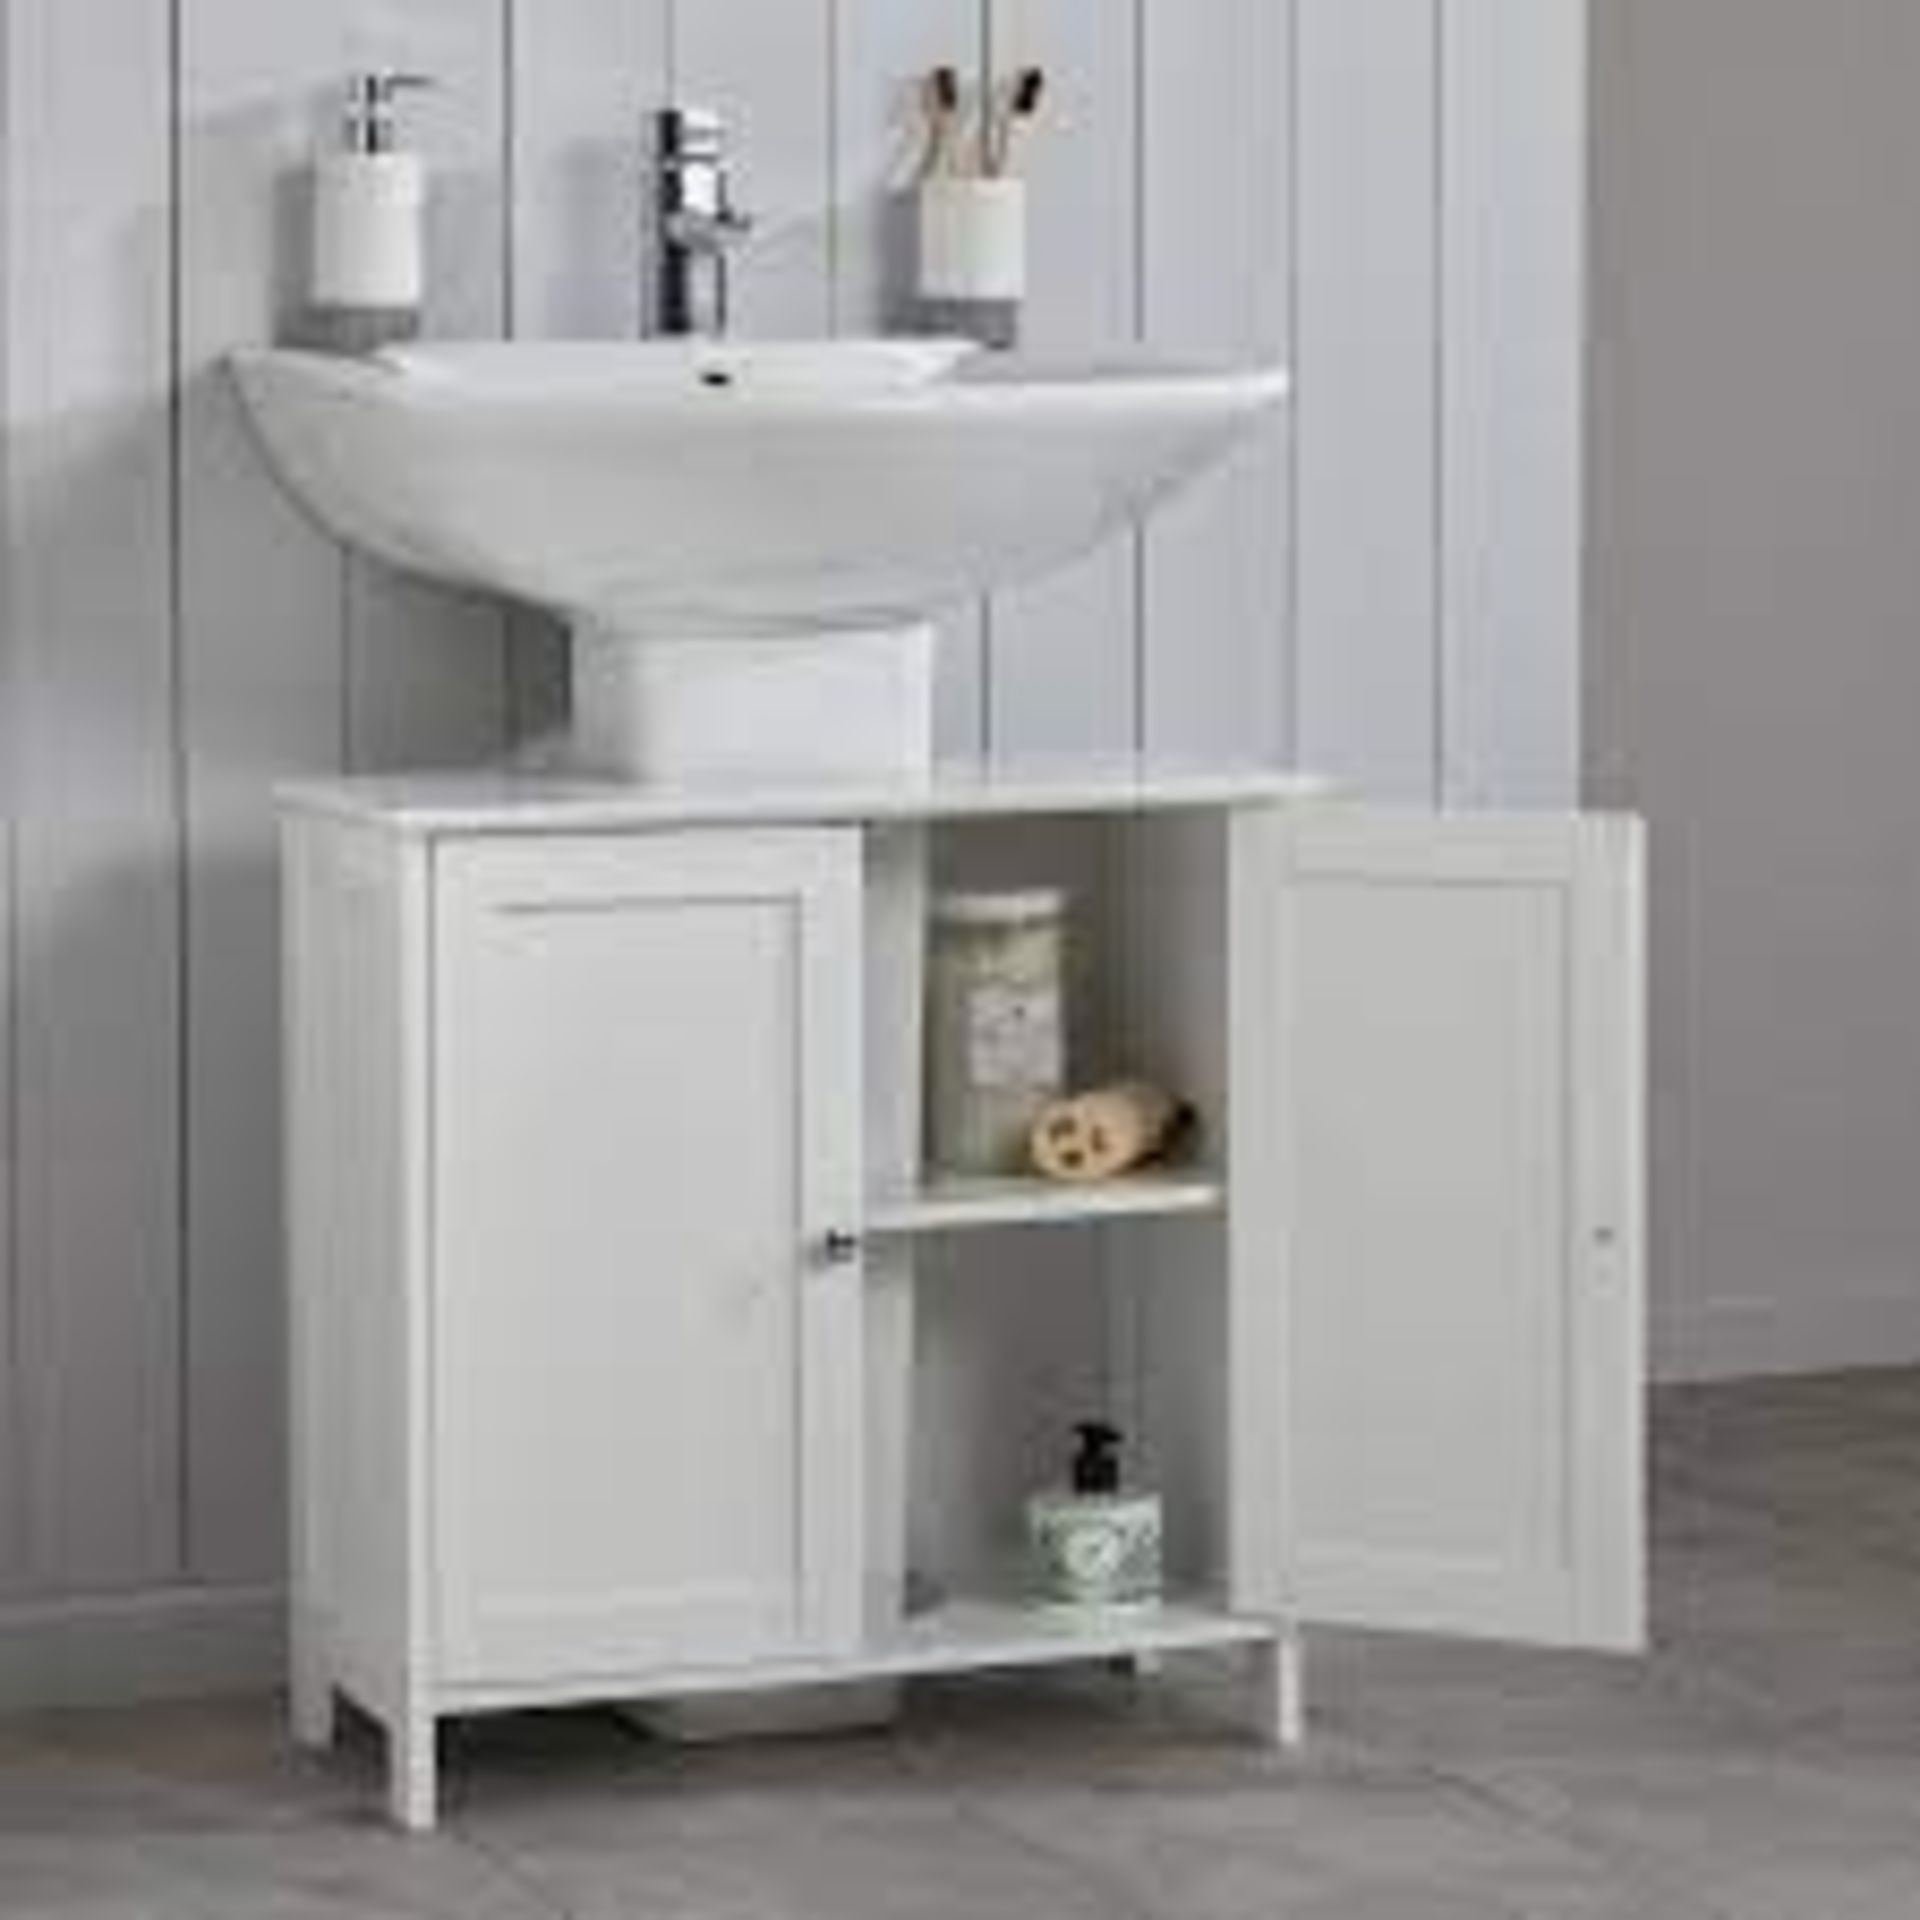 Ashby White Tongue & Groove Bathroom Under Sink Cabinet. - SR3. Utilise unused space around your - Image 2 of 2